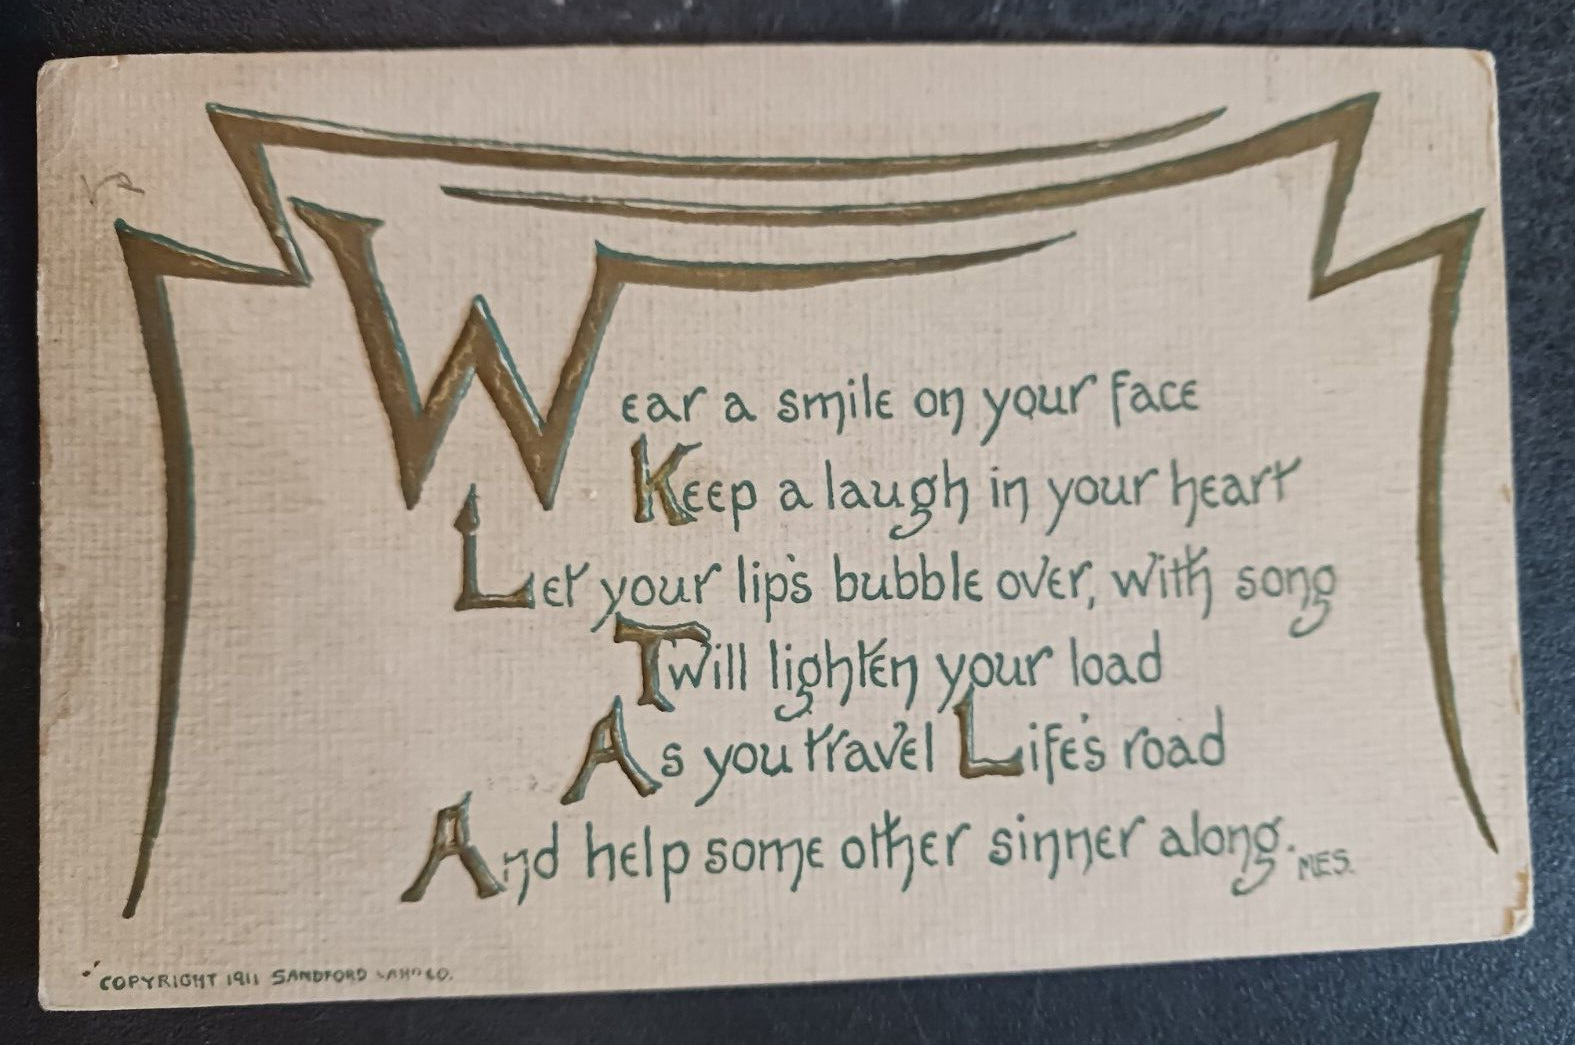 1913 postcard Embossed Sandford Poem Motto Wear A Smile On Your Face posted